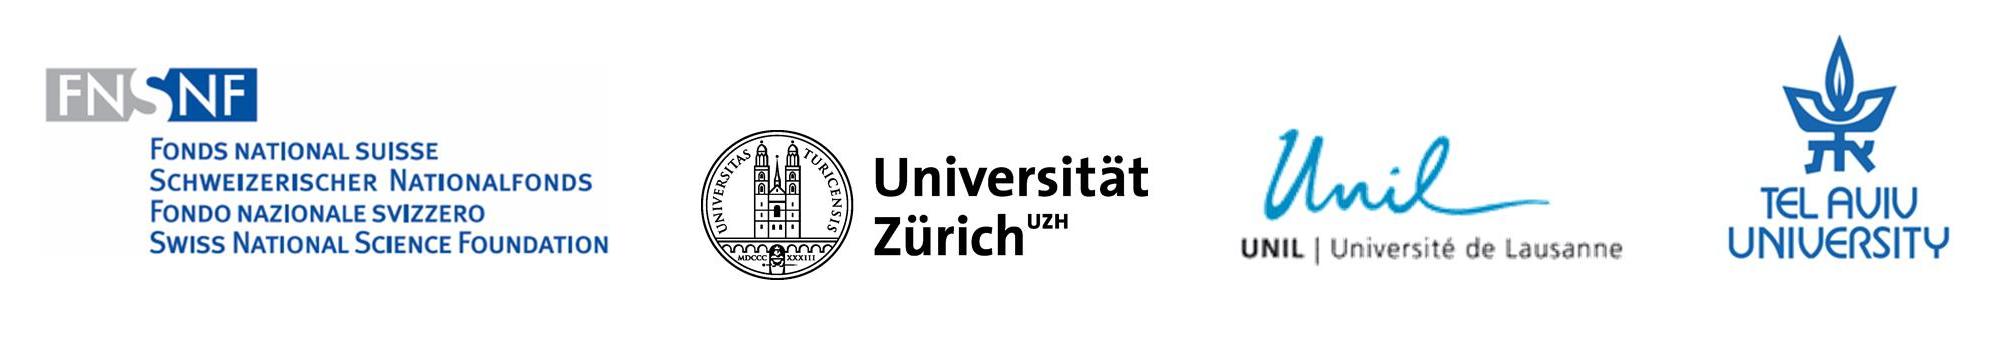 Logos of the Universities of Tel Aviv, Lausanne and Zurich, and the SNF